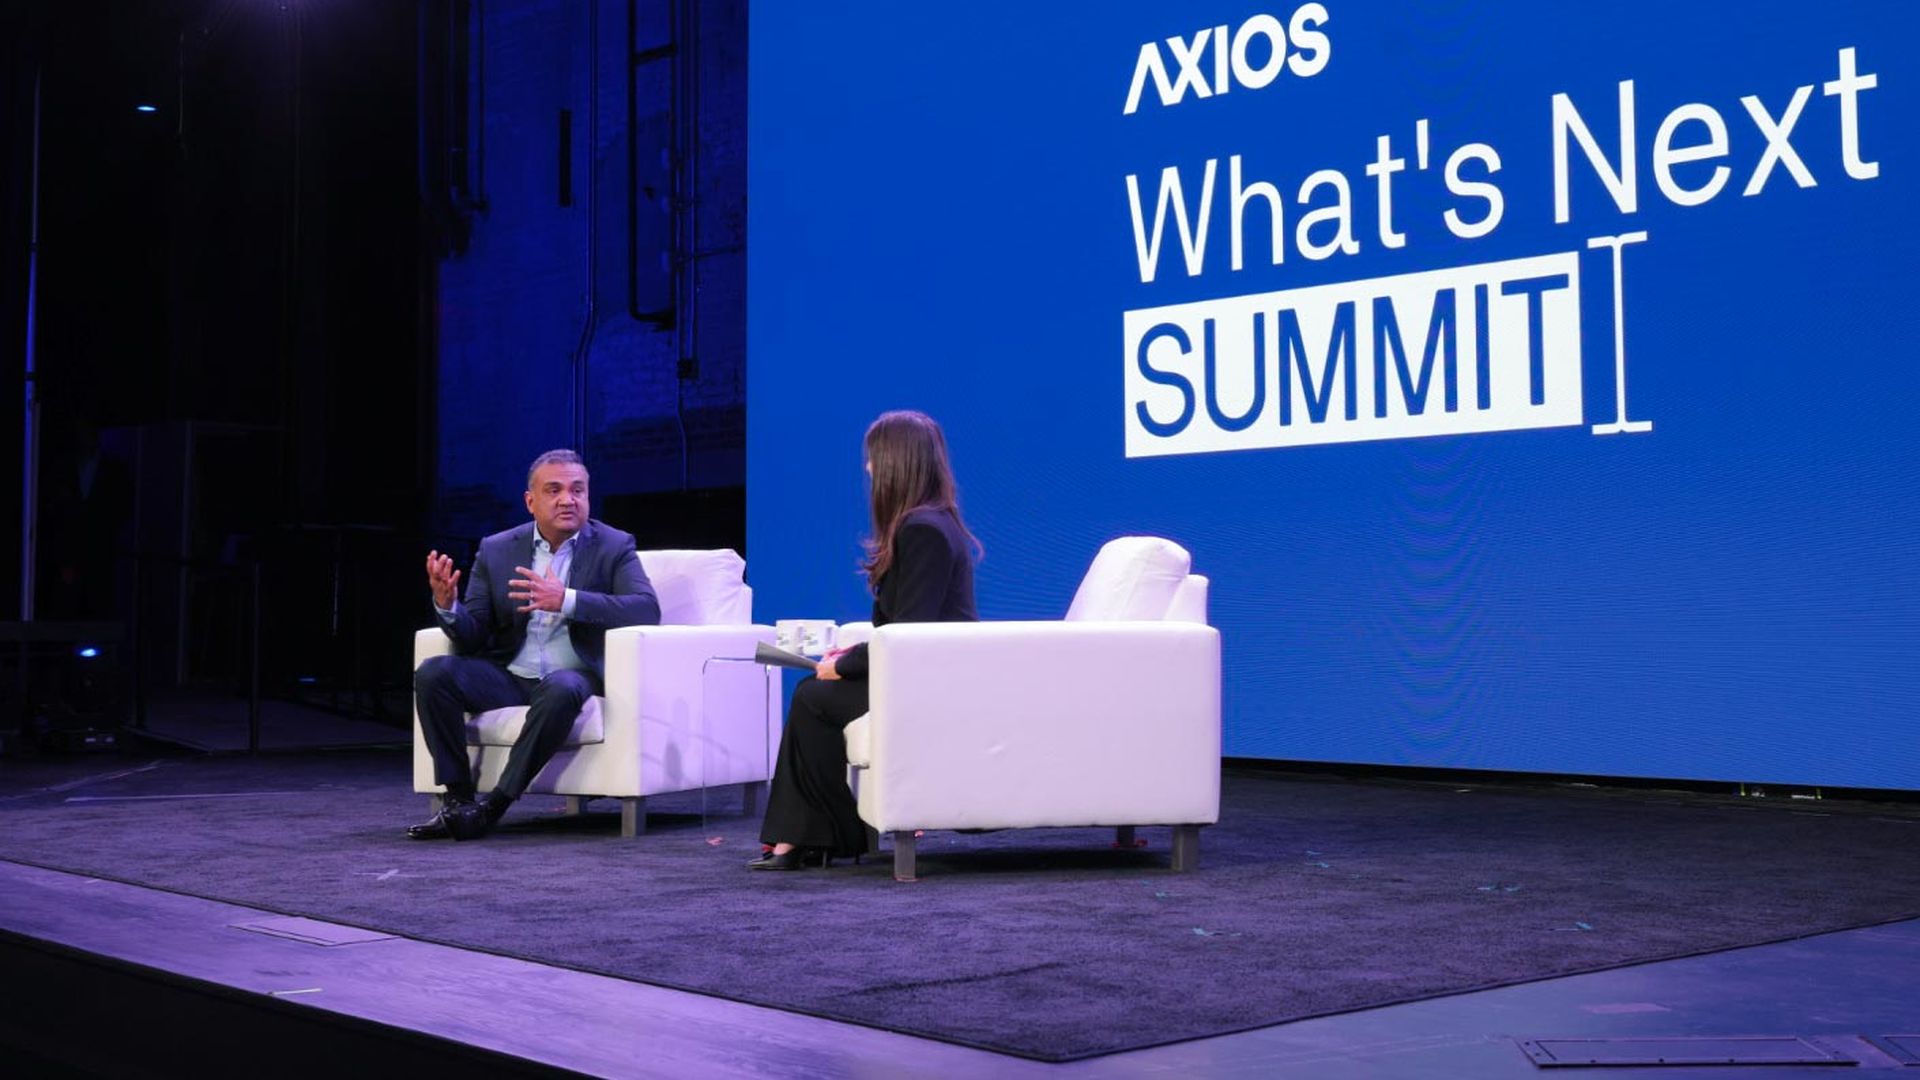 Axios' What's Next Summit in Washington, D.C. on March 29. Photo: Axios